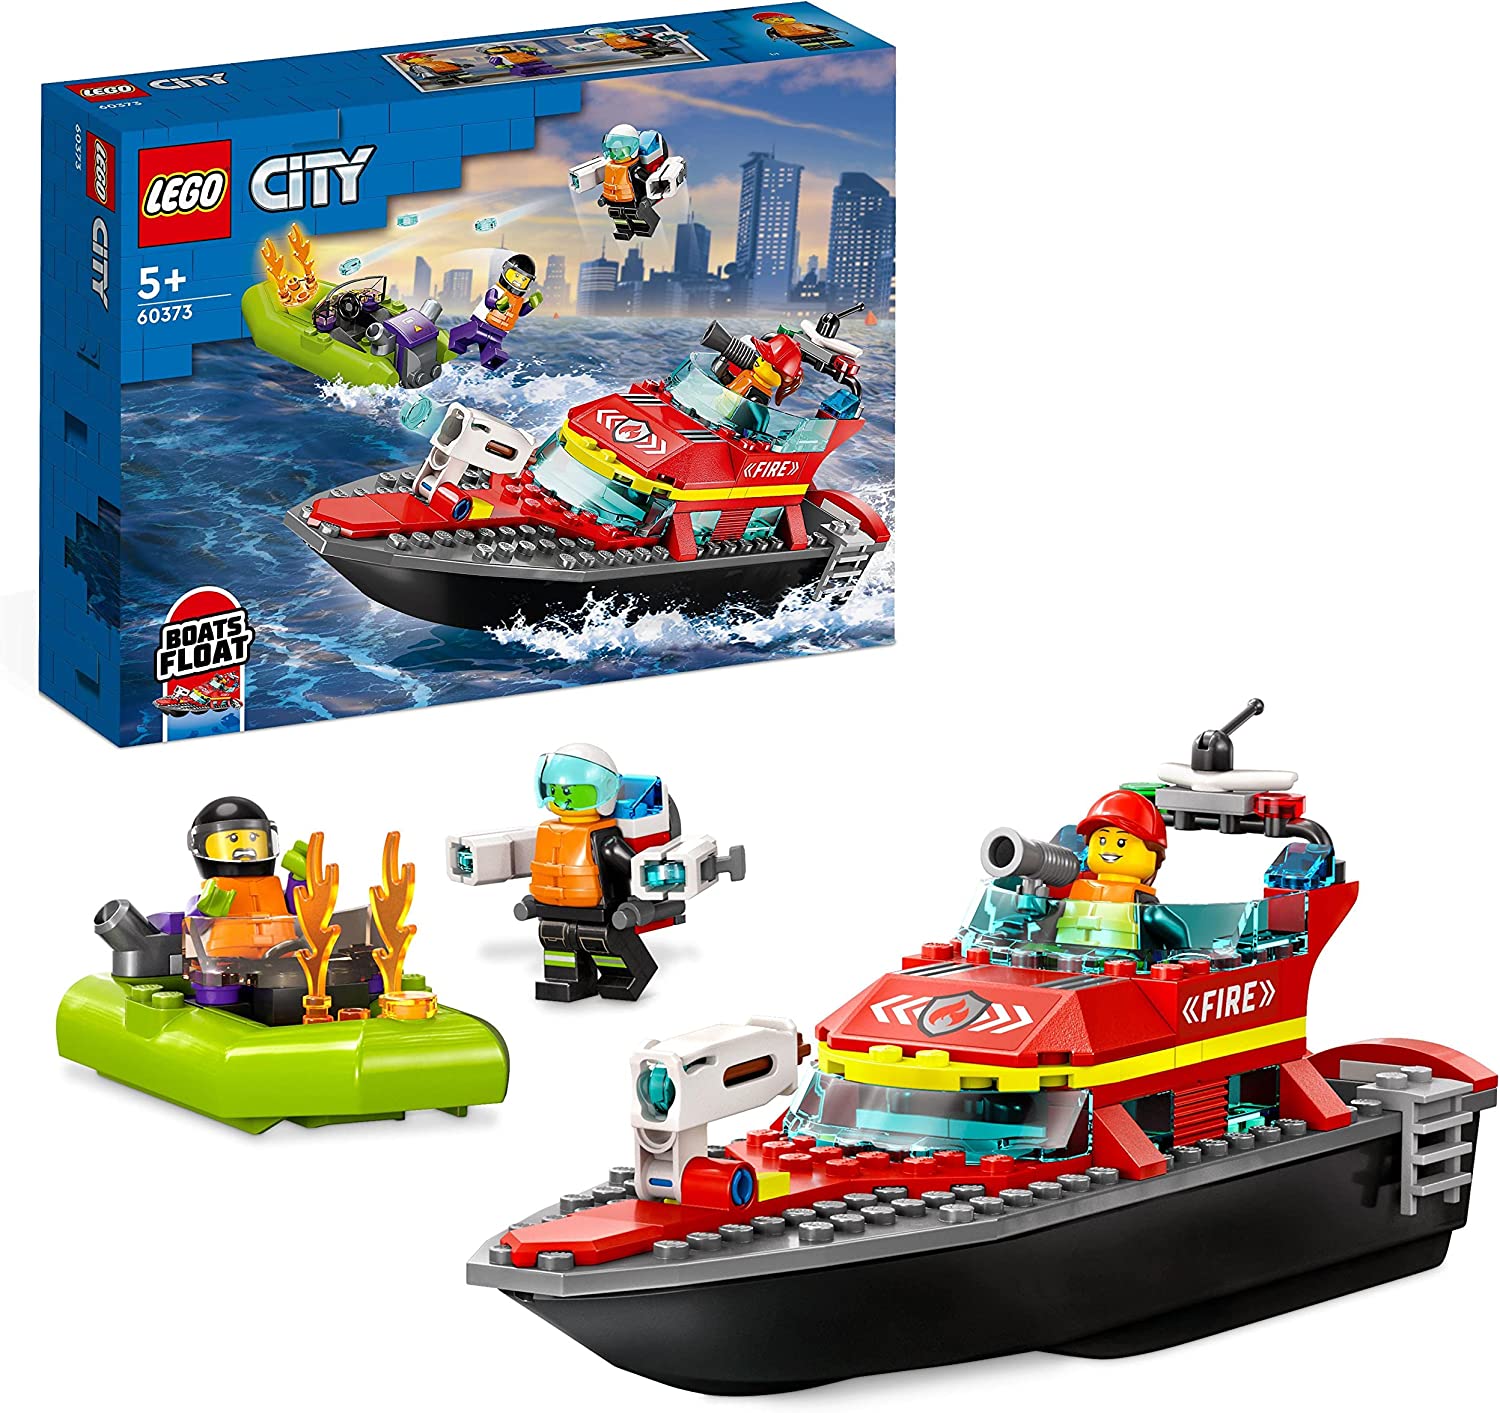 LEGO 60373 City Fire Boat, Toy Floats in the Water with Racing Boat, 3 Mini Figures and Jet Pack, Fire Brigade Boat Toy, Gift Idea for Boys and Girls from 5 Years